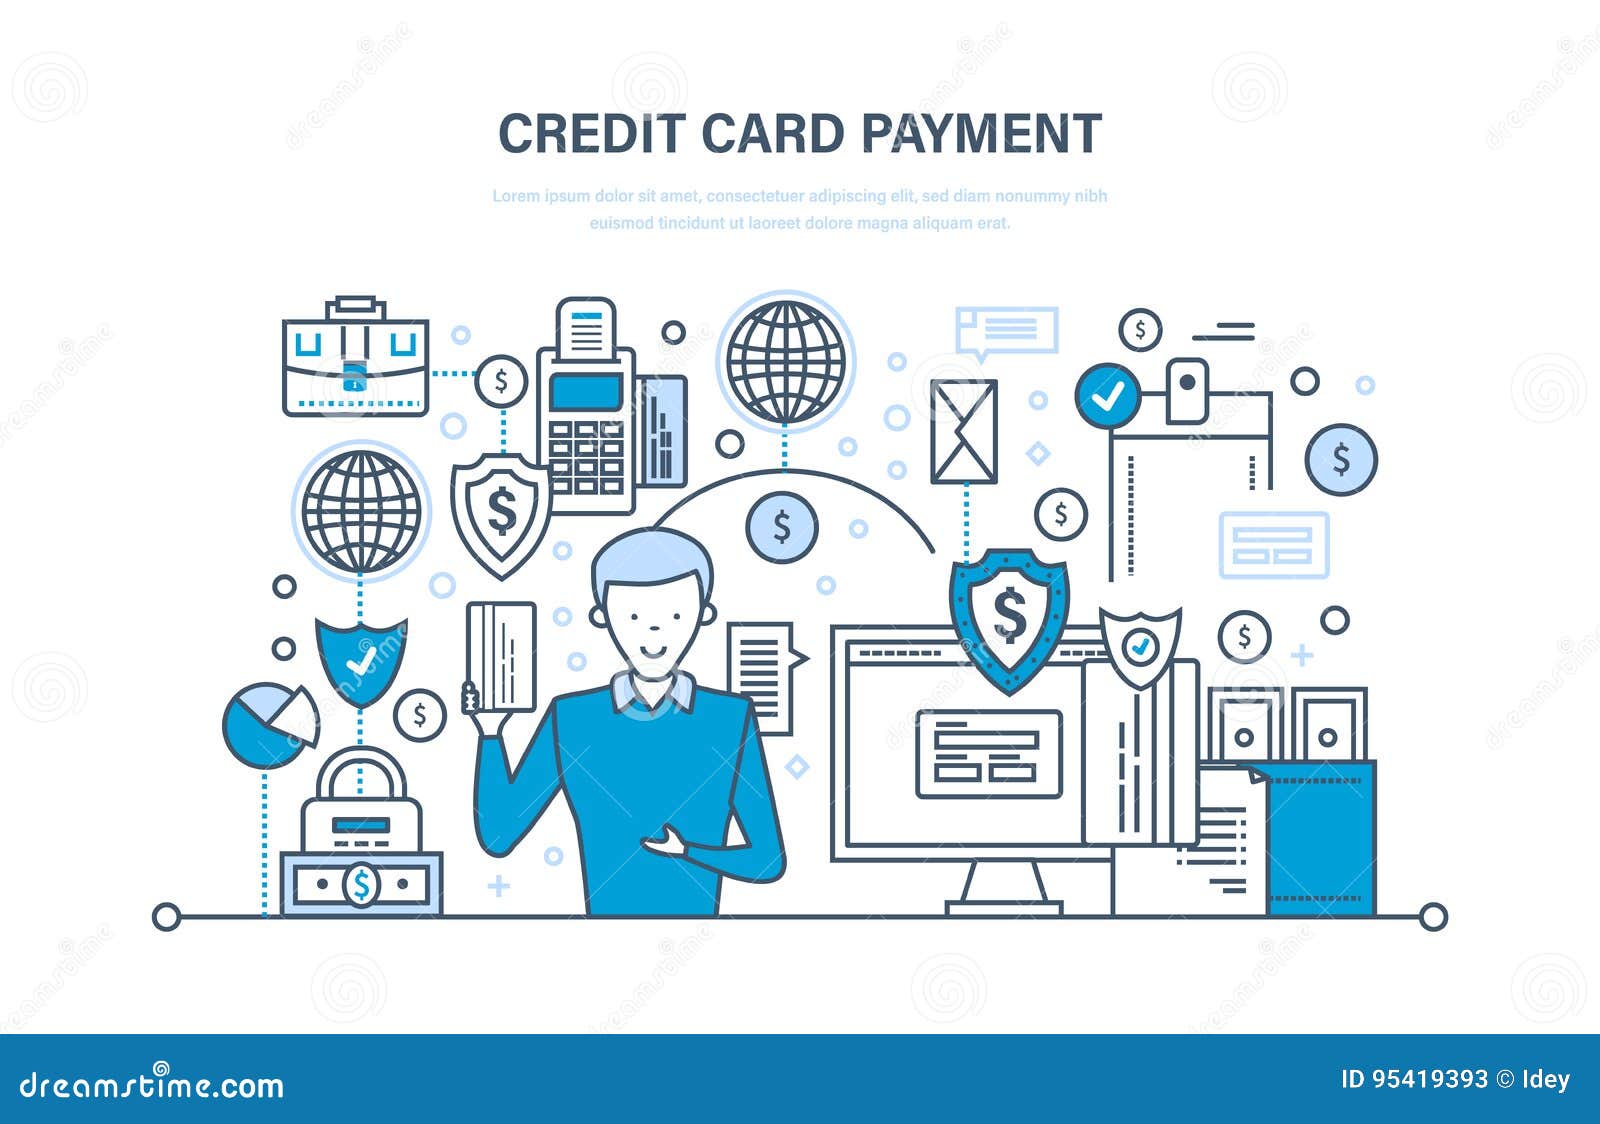 credit card payment, secure transactions, finance, bank, banking, money transfers.